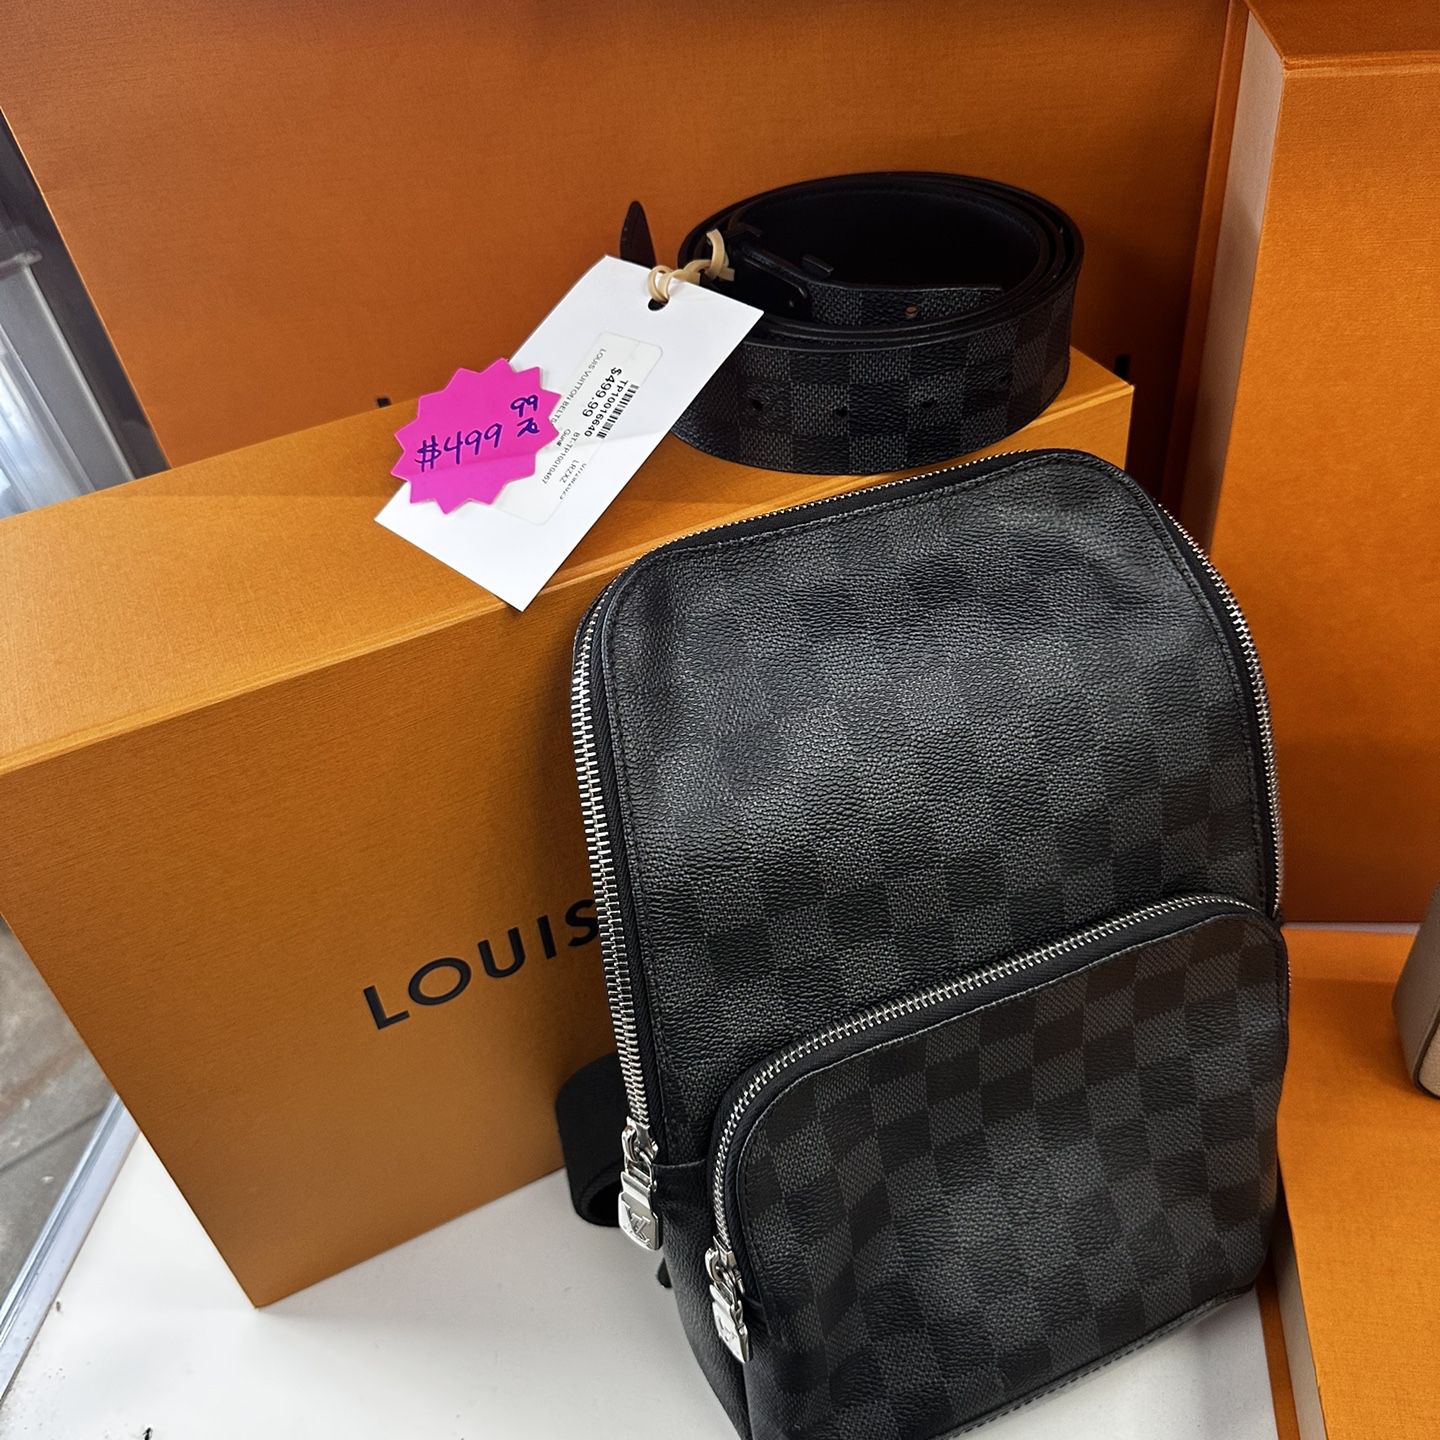 Authentic Louis Vuitton coin purse for Sale in Tampa, FL - OfferUp